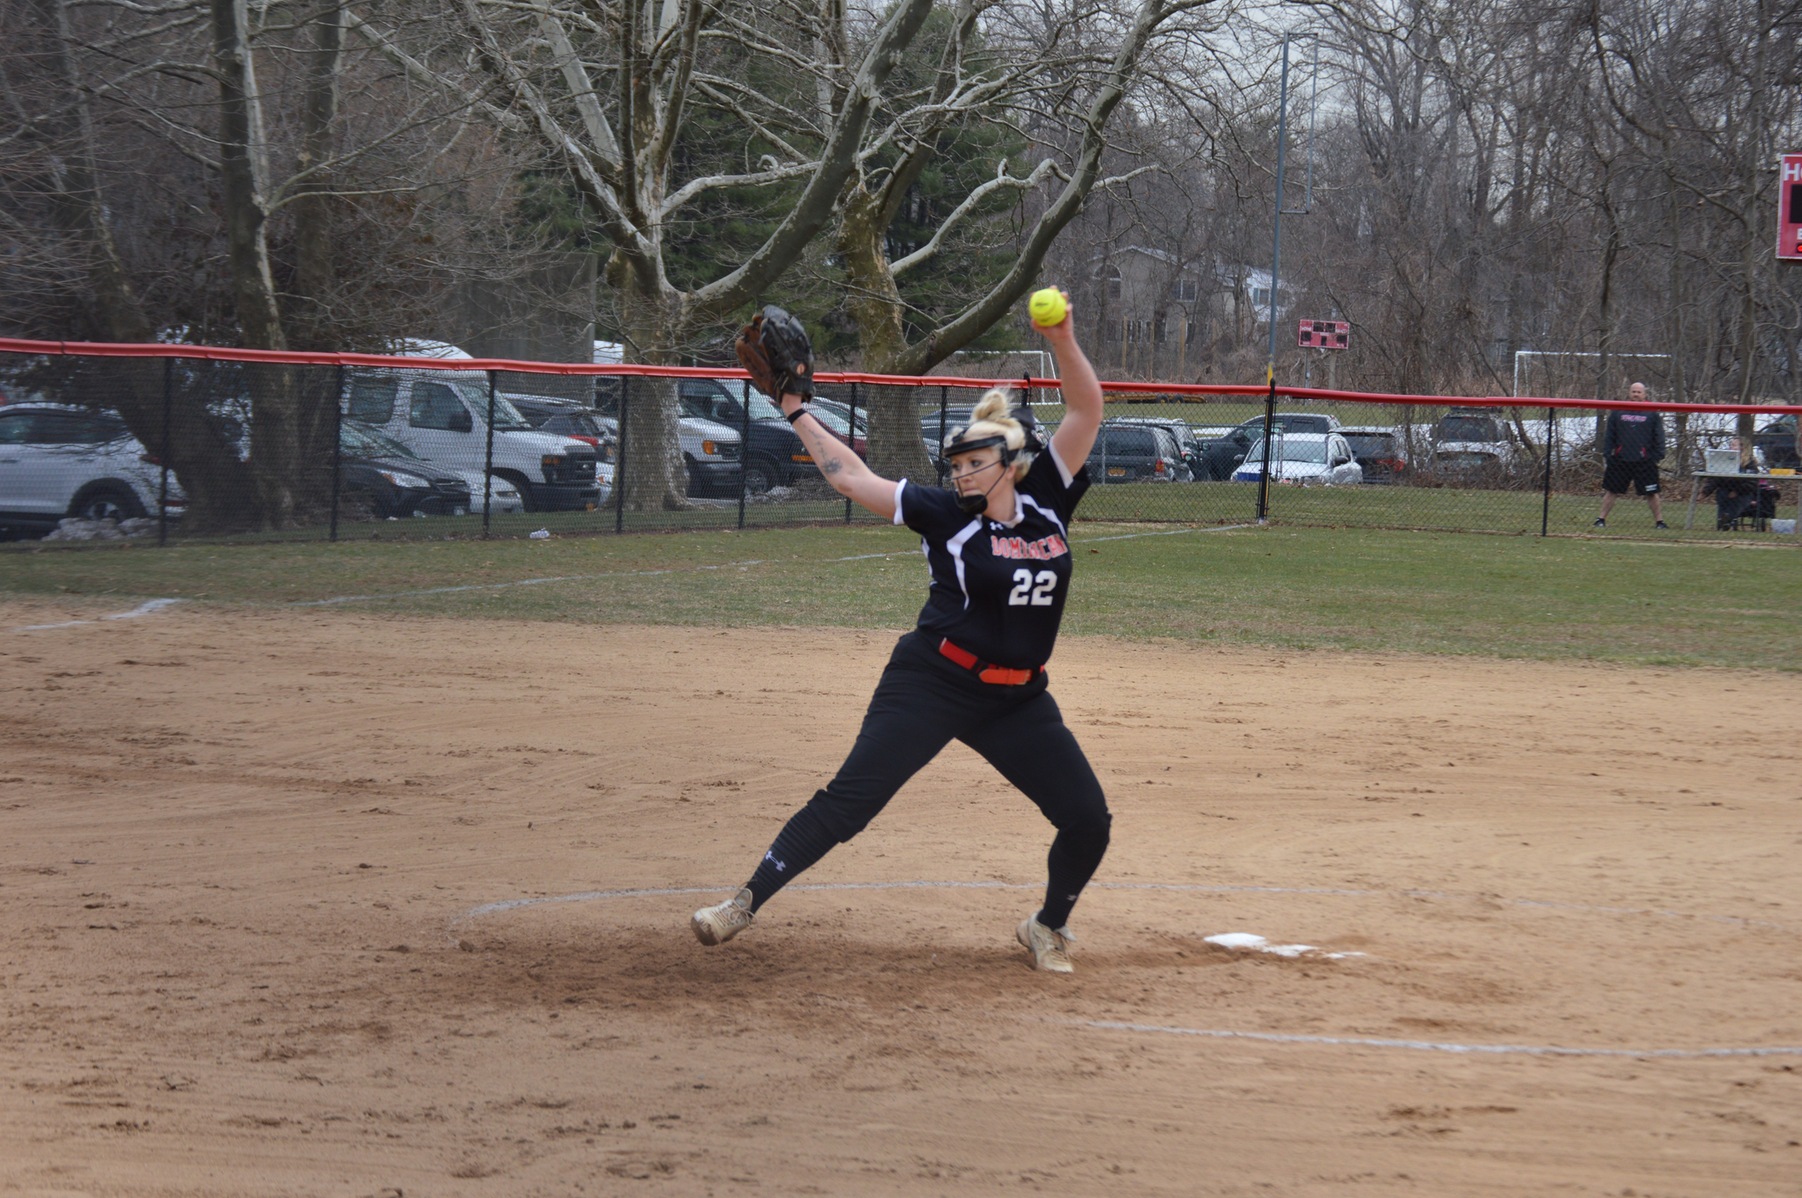 The Lady Chargers swept a CACC double-header over the visiting Warriors of Nyack College in games played this afternoon.